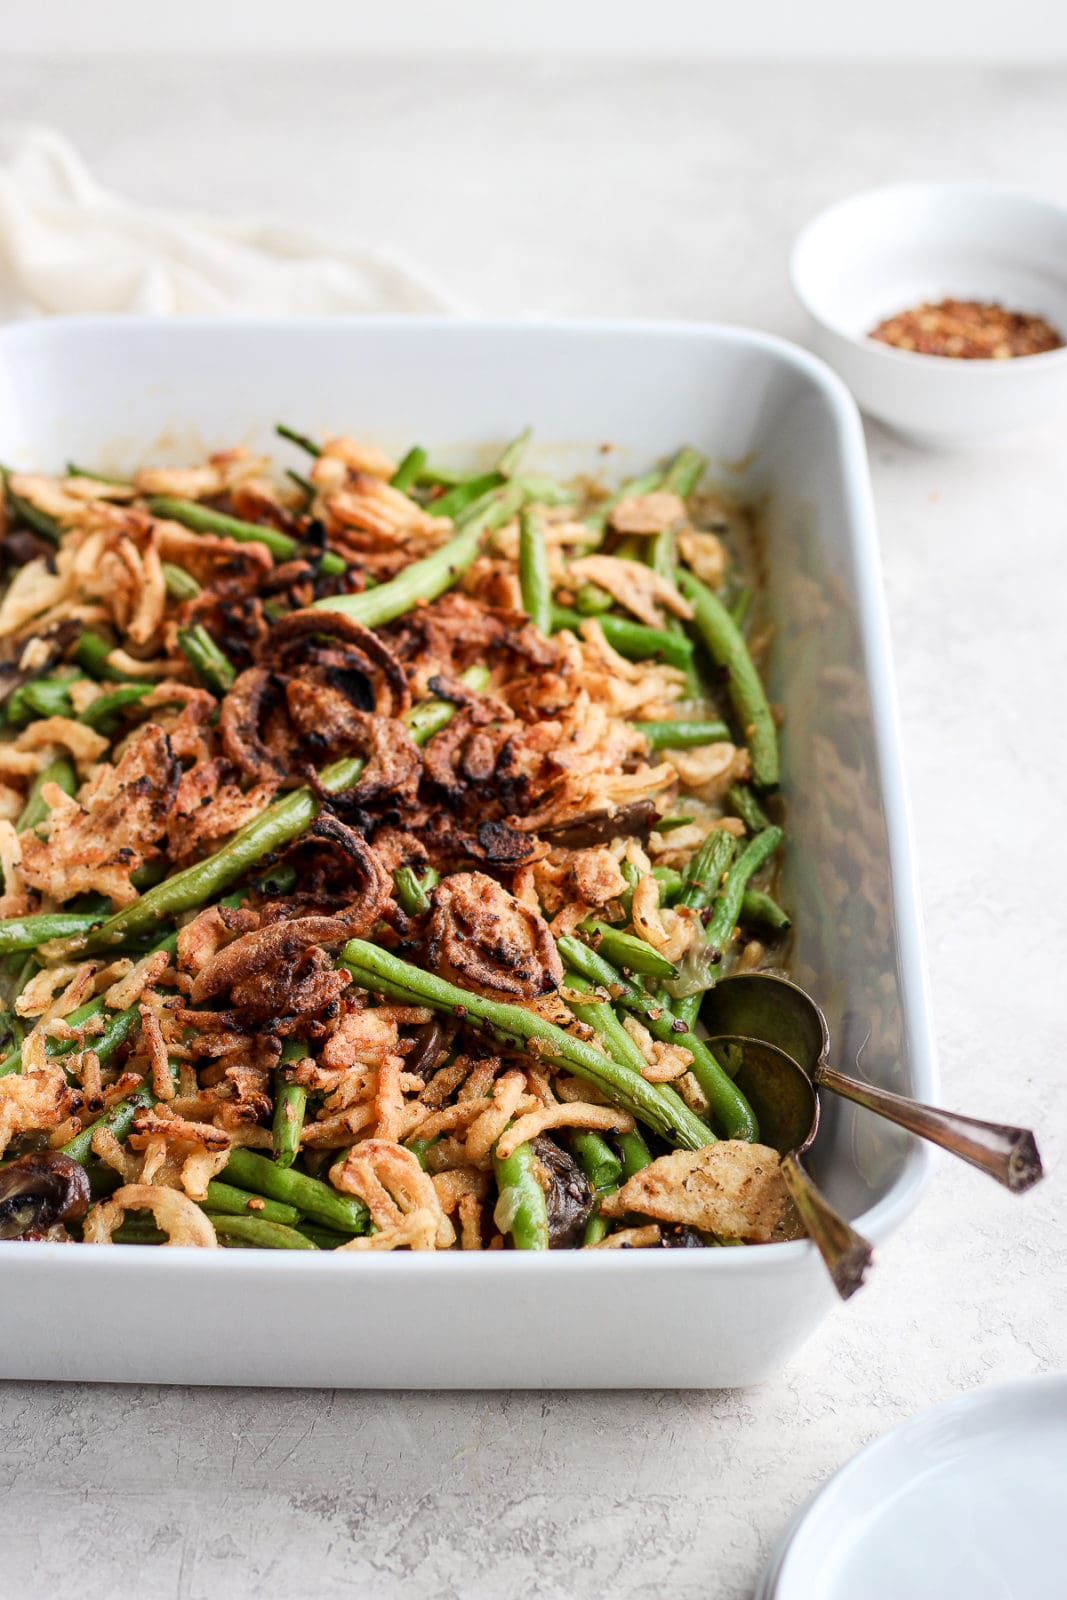 Dairy-Free Green Bean Casserole - the classic holiday side dish made with dairy-free cream of mushroom soup! So delicious! #thanksgiving #christmas #greenbeancasserole #dairyfree